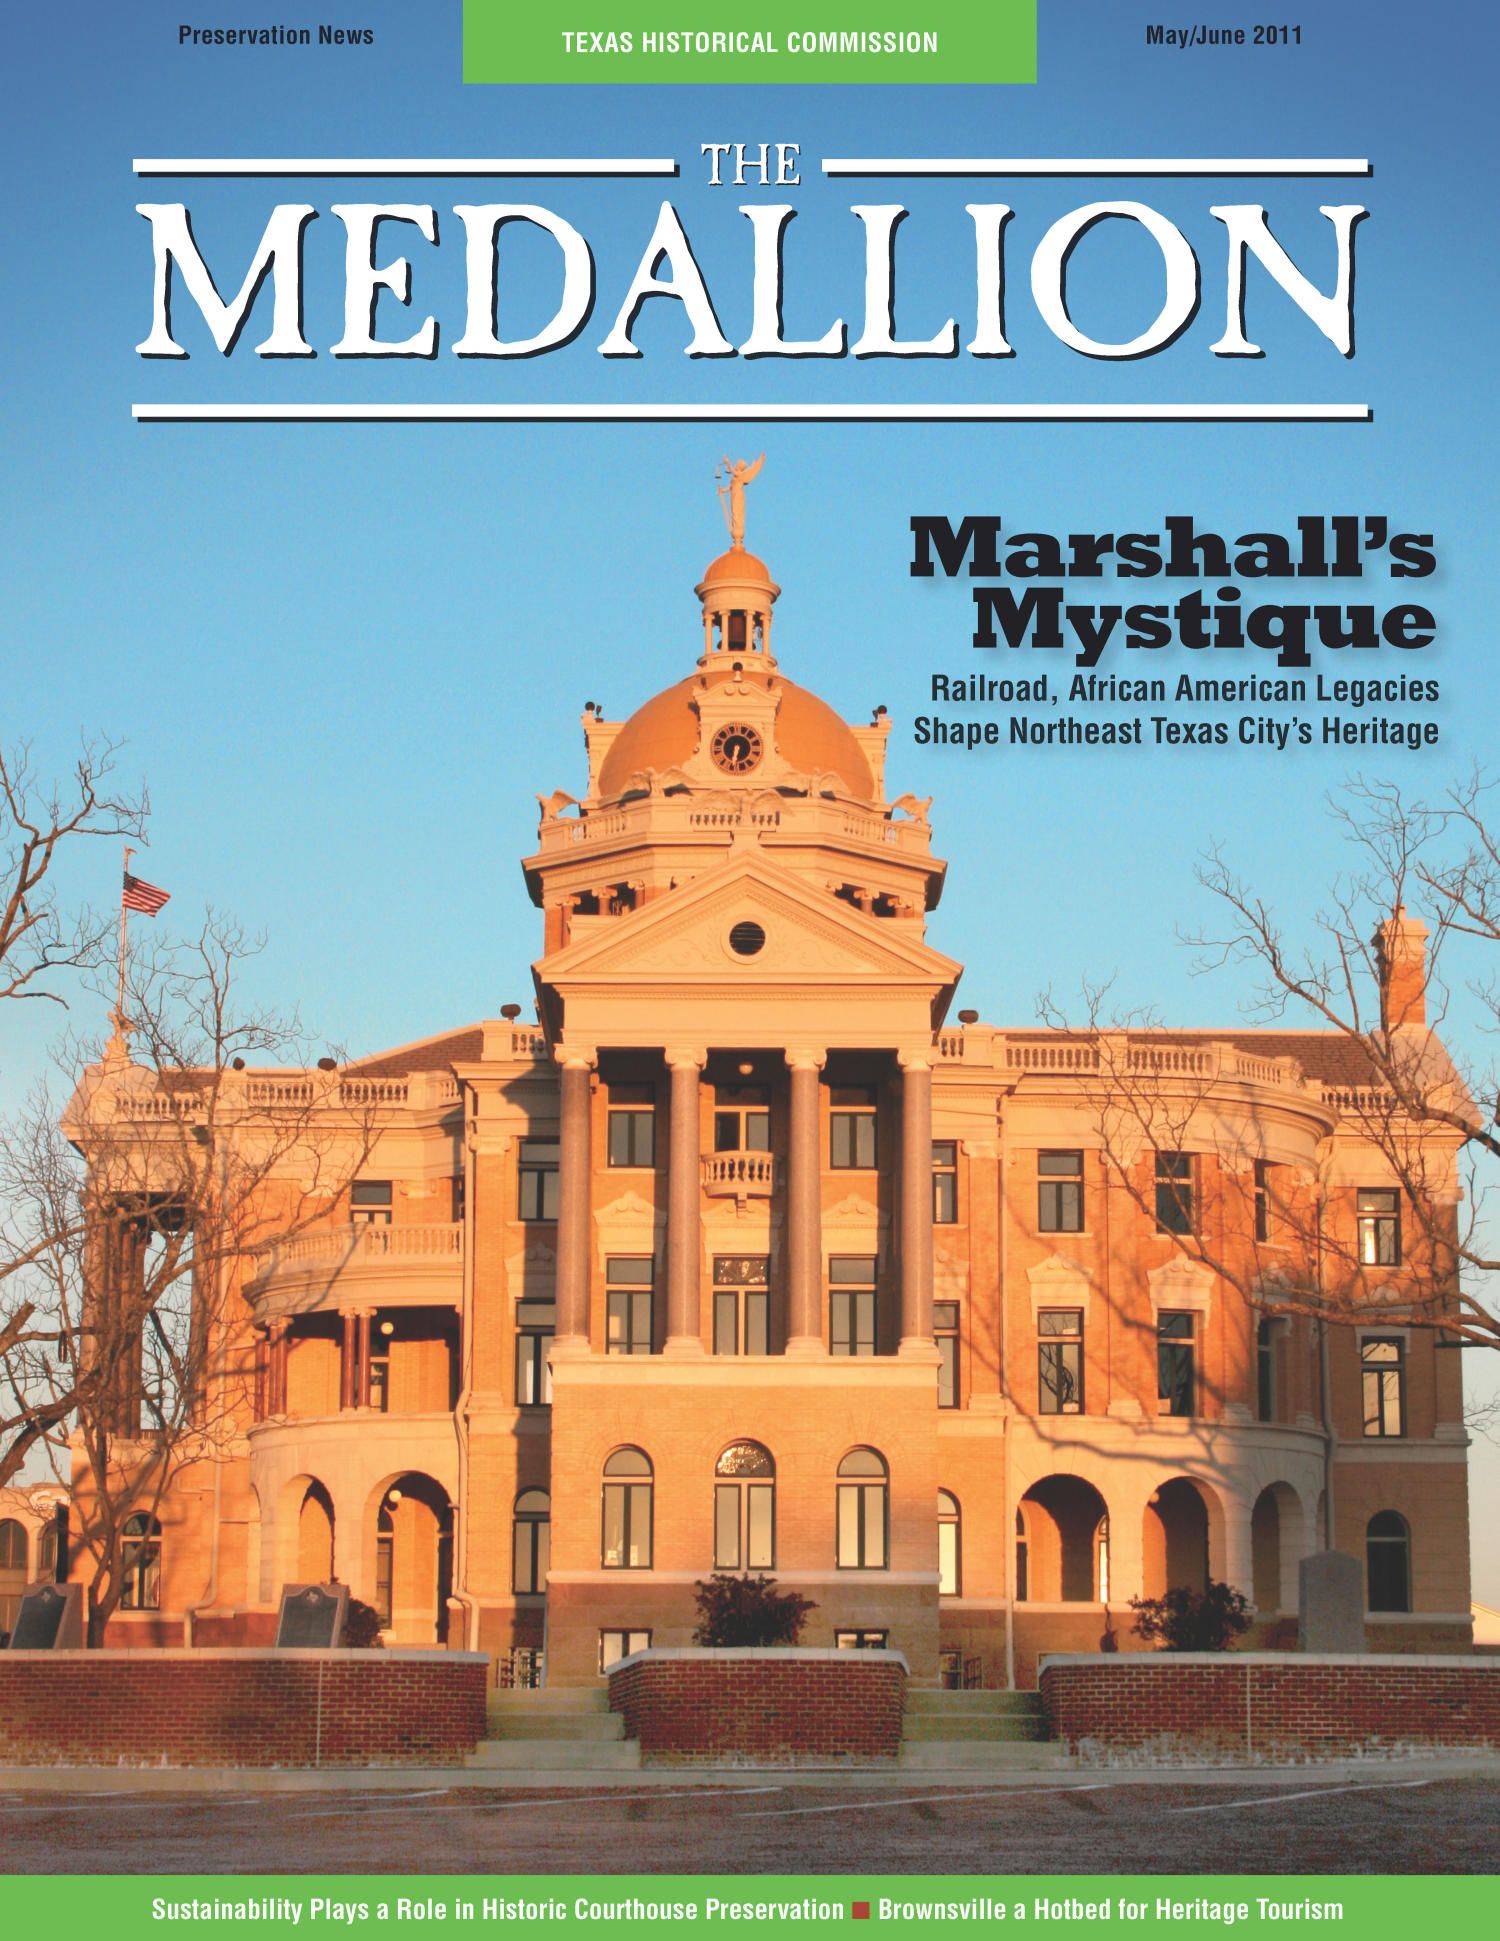 The Medallion, Volume 48, Number 5-6, May/June 2011
                                                
                                                    Front Cover
                                                